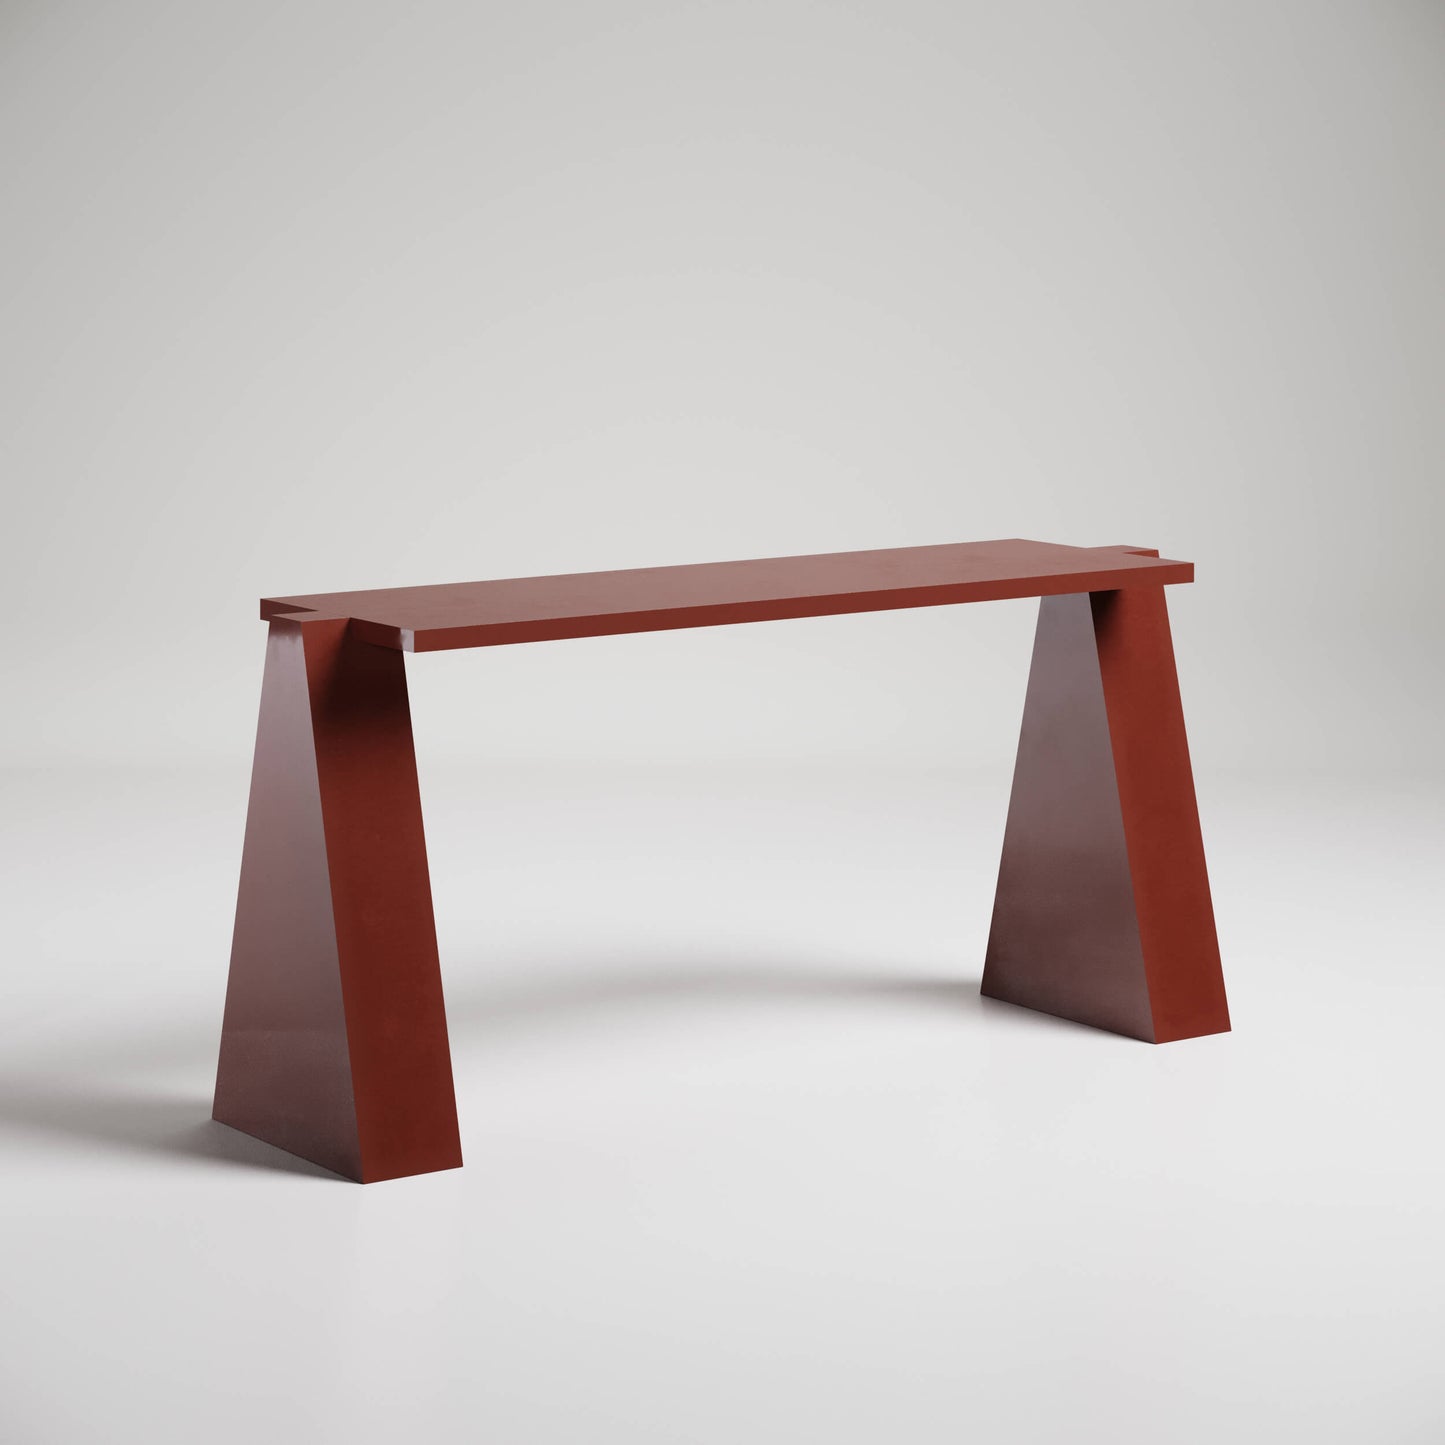 Oxblood sculptural console table